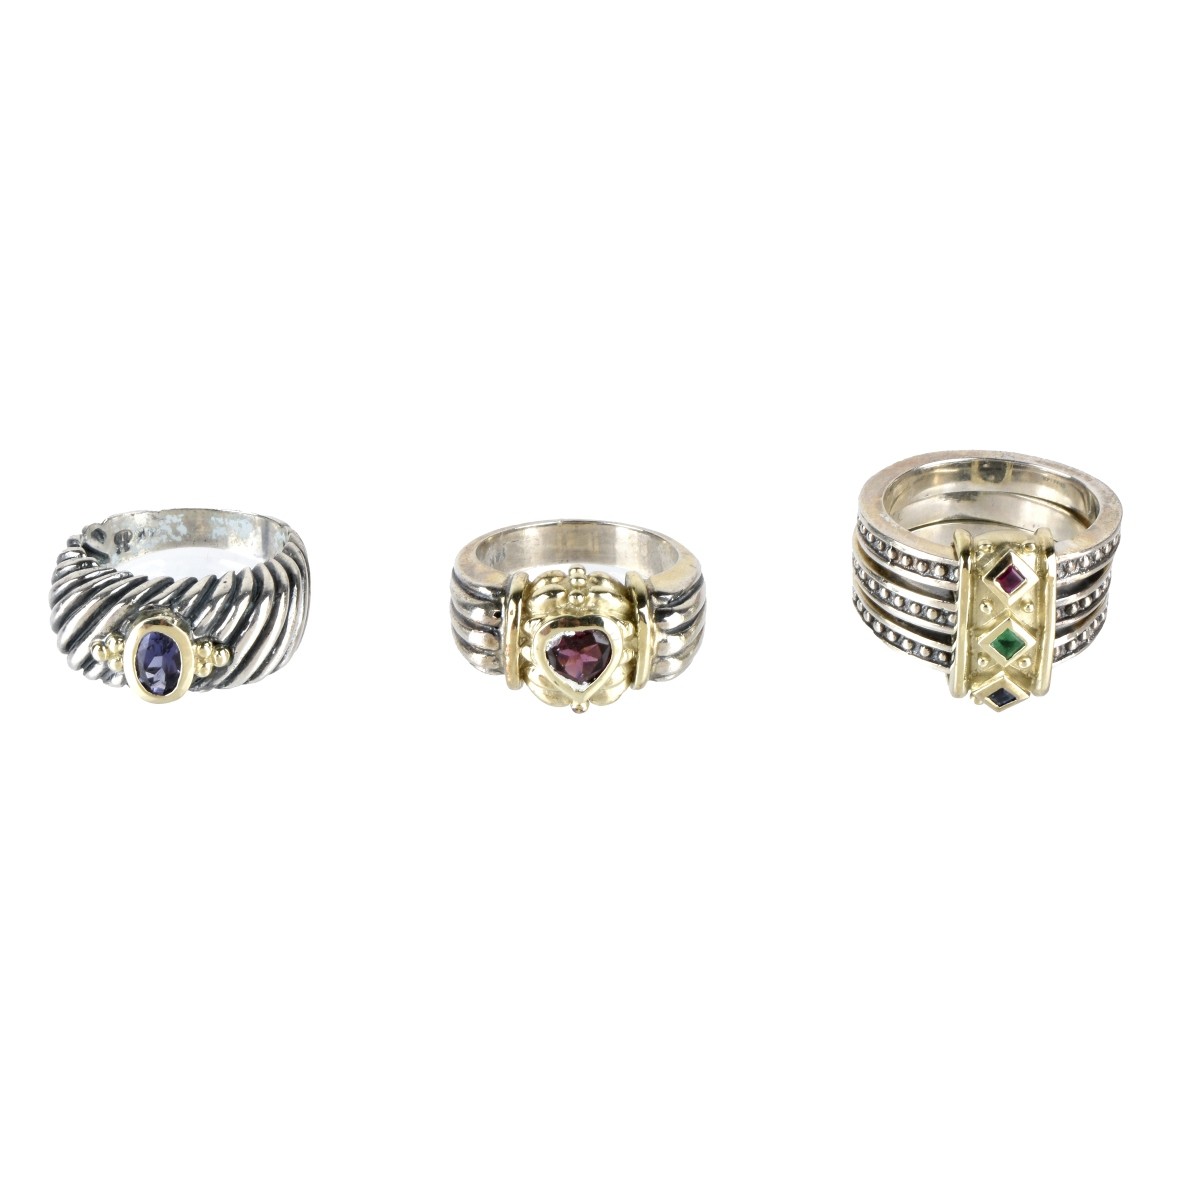 Gemstone, 14K and Silver Rings